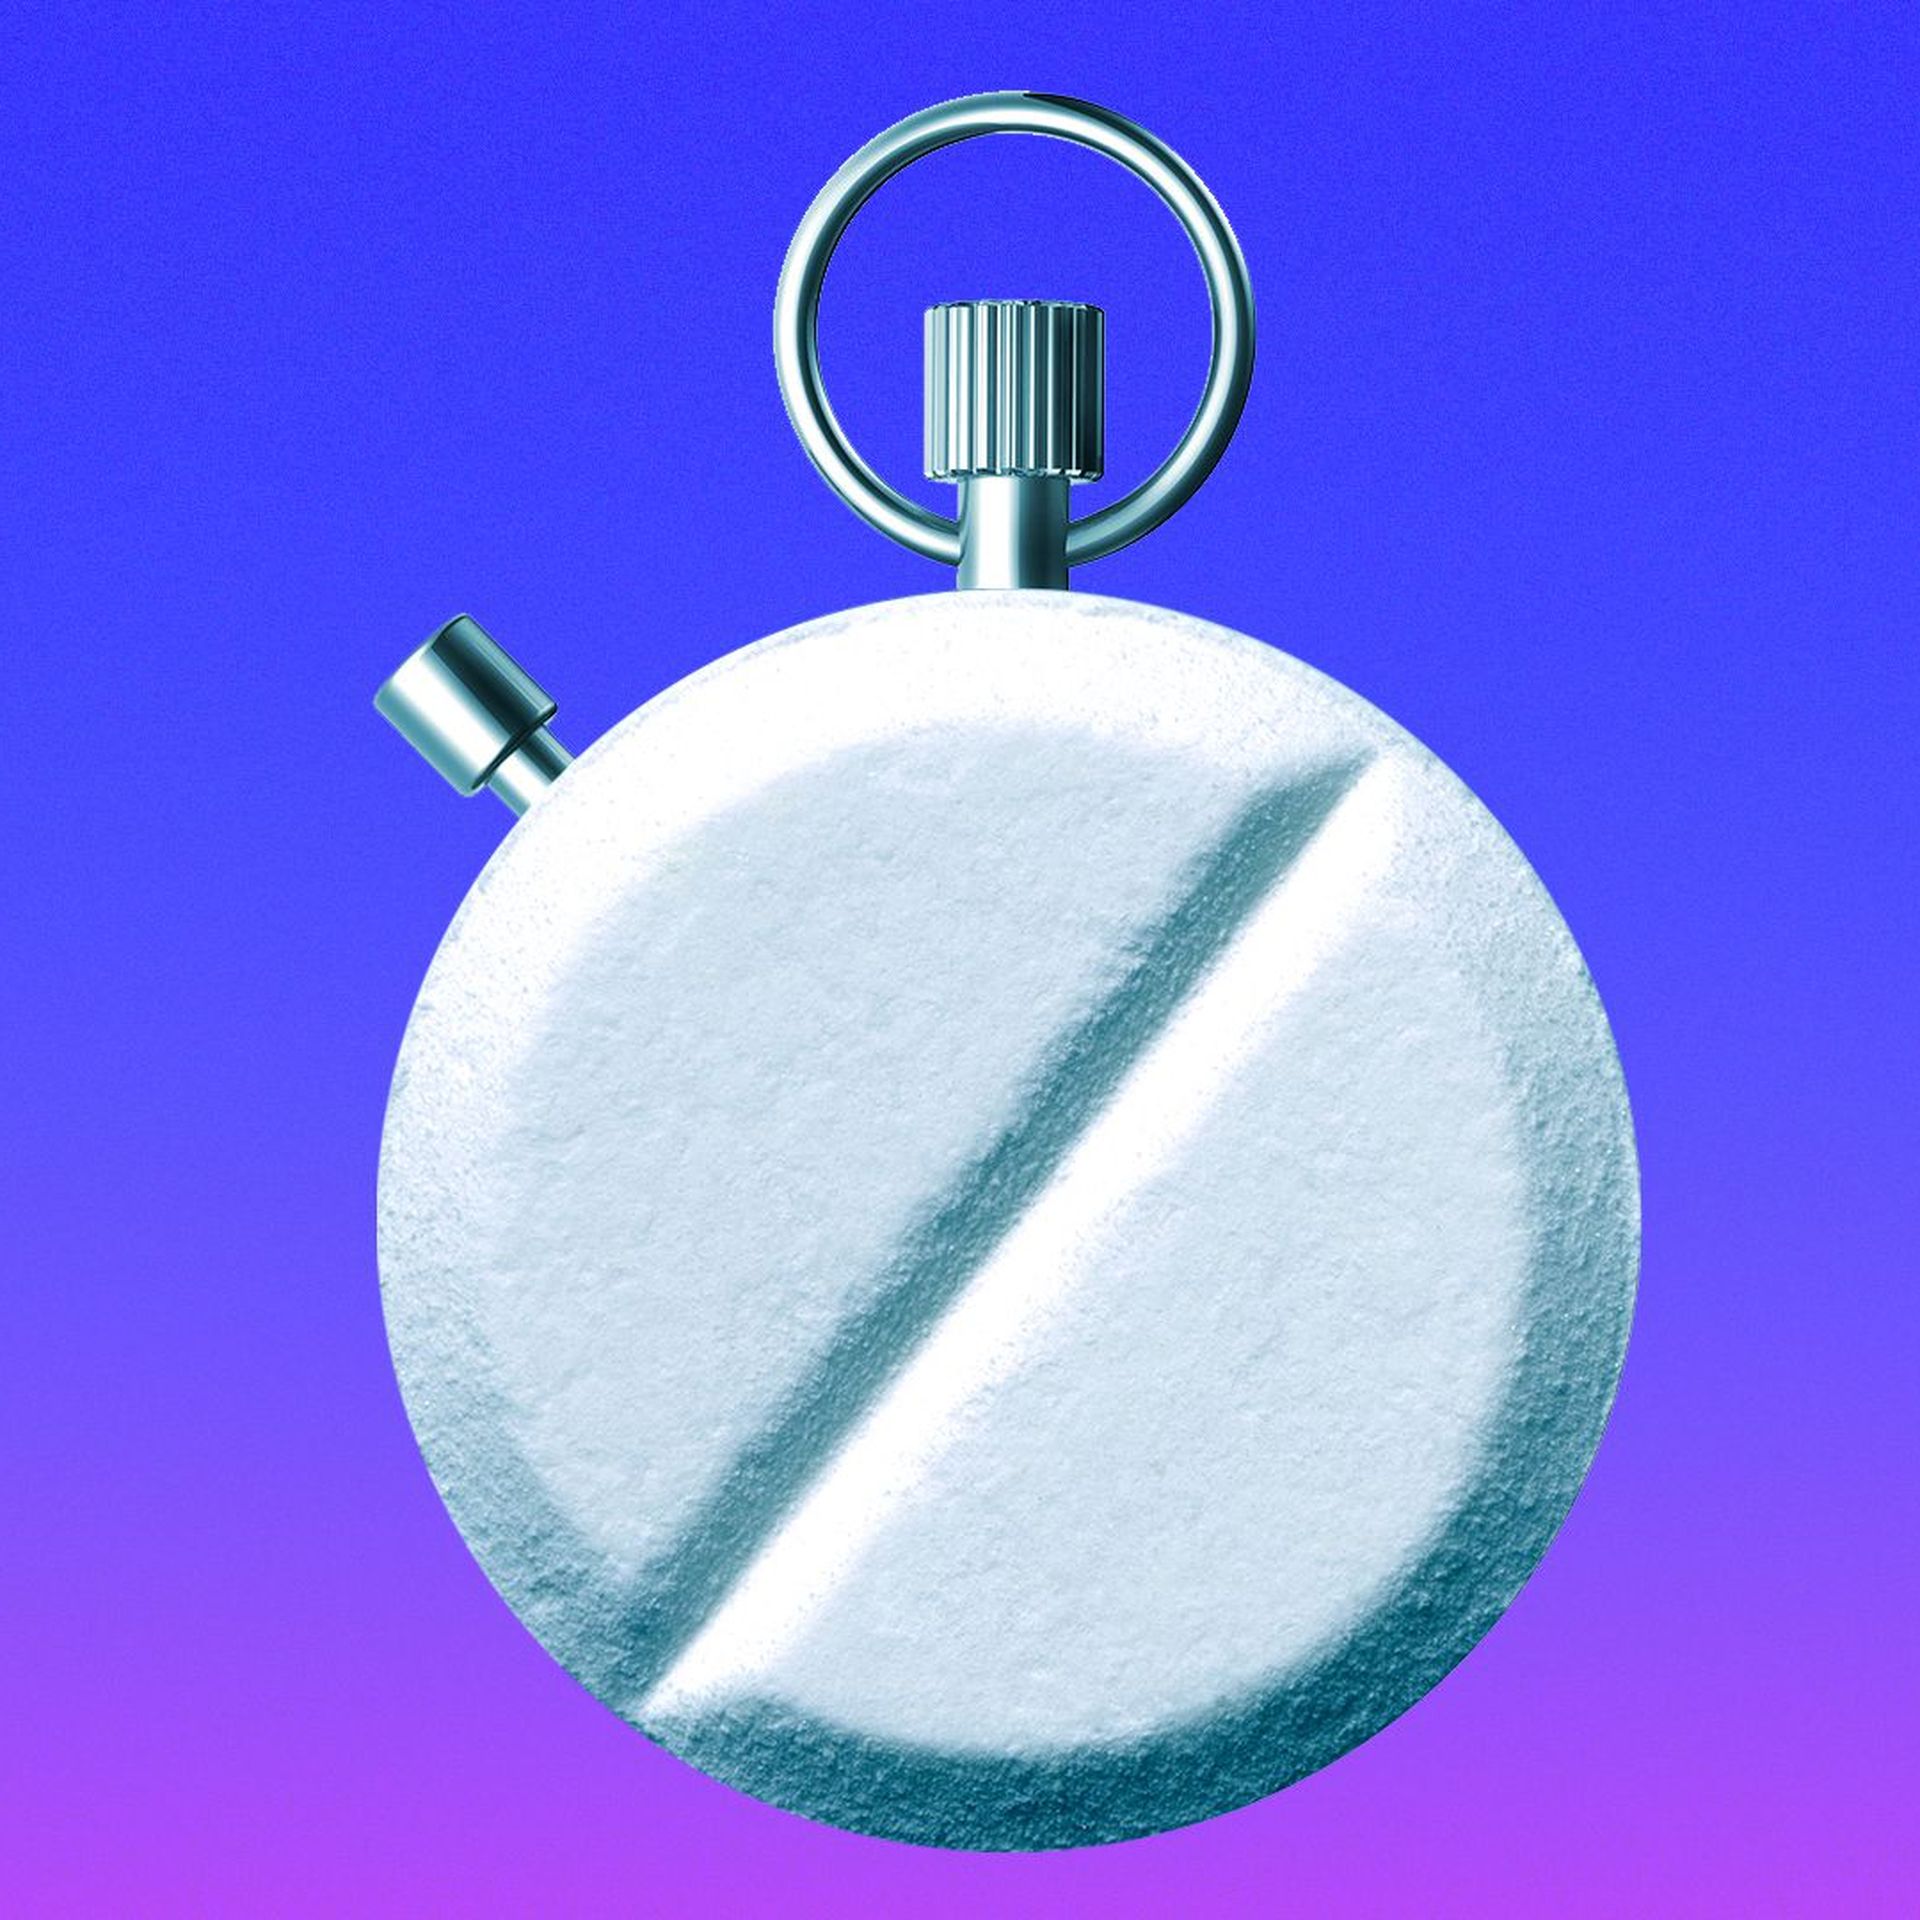 Illustration of a stopwatch made from a large round prescription pill